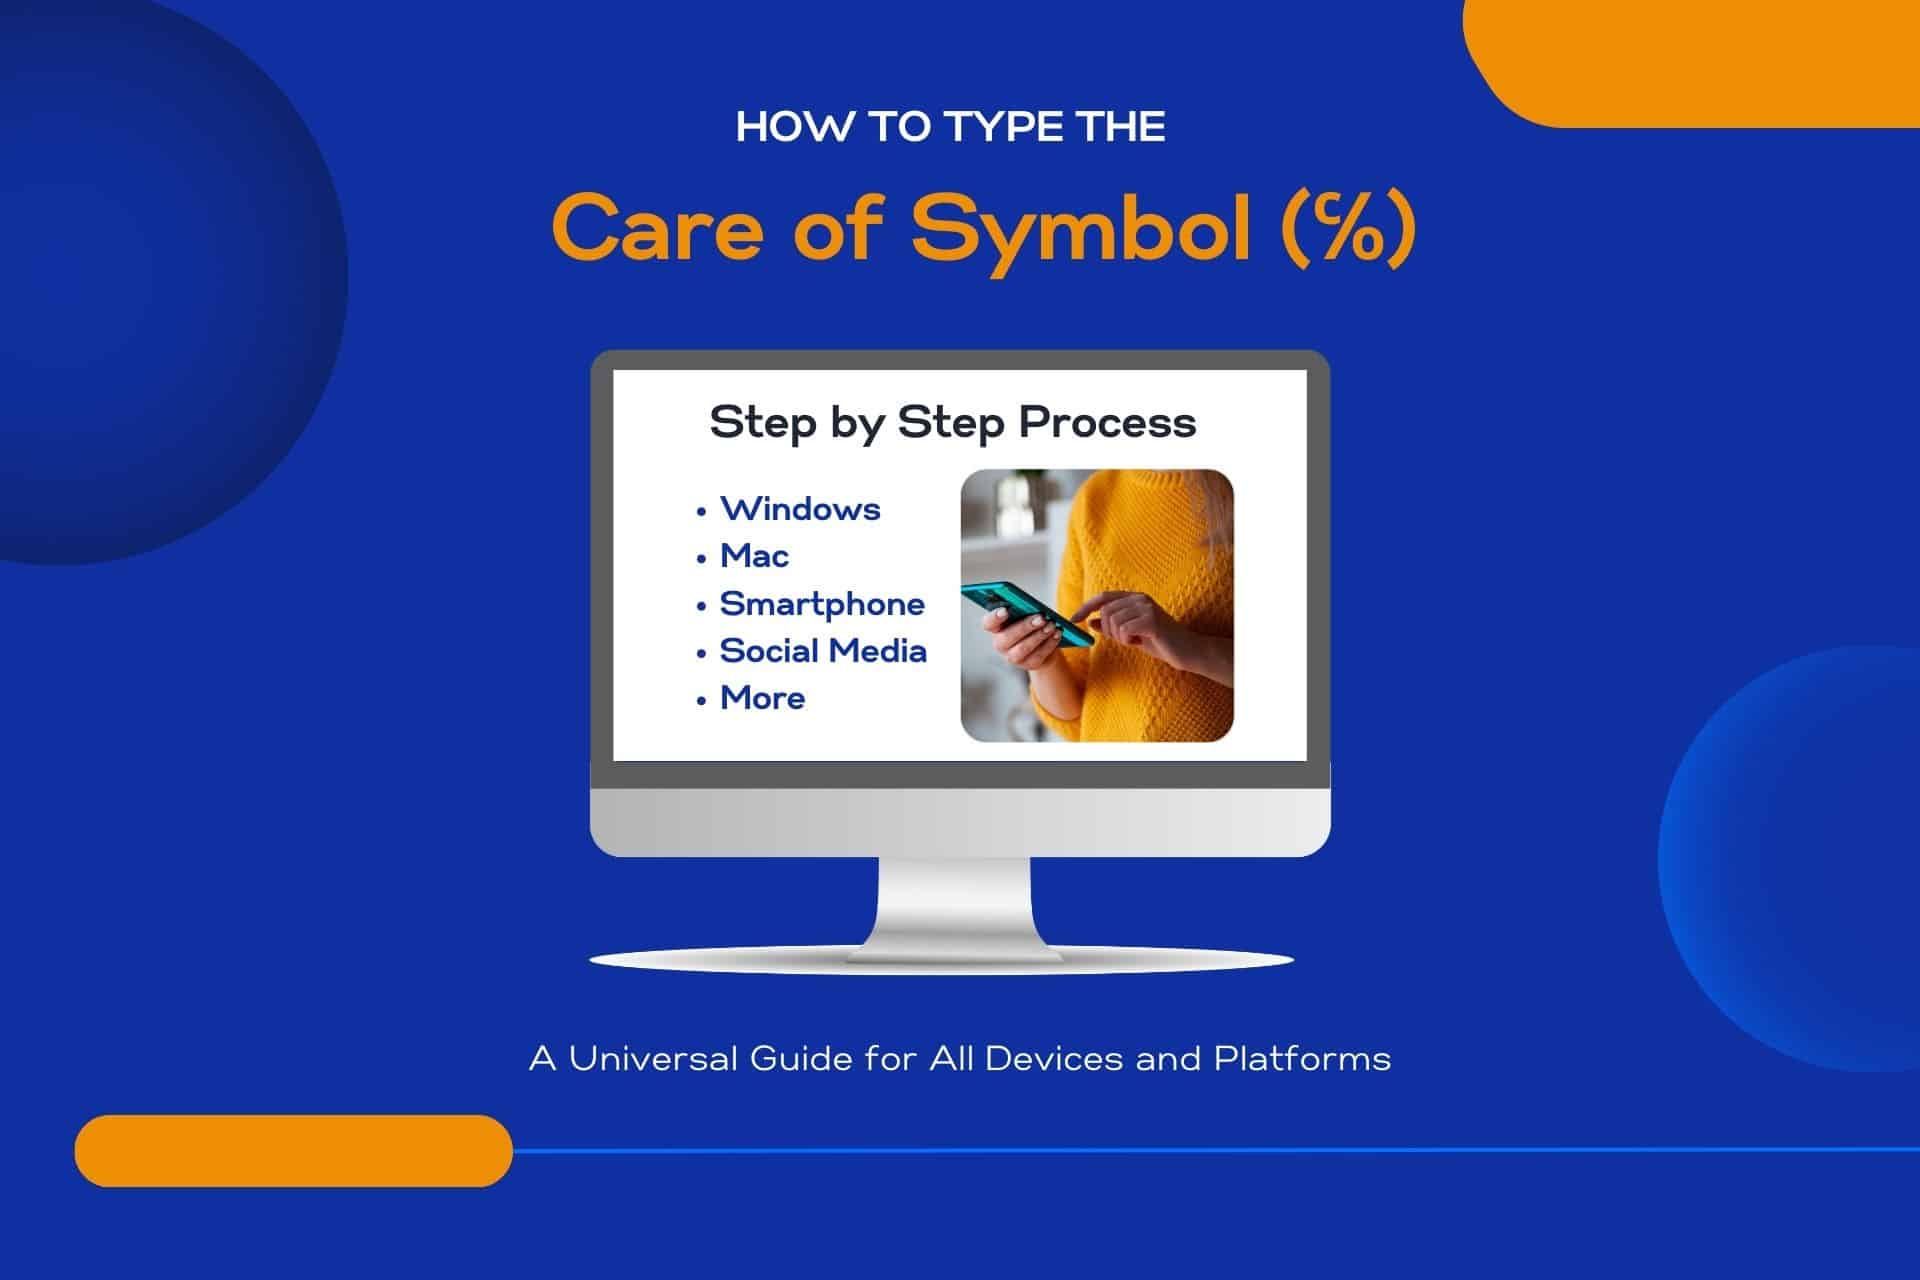 how to type the Care of Symbol